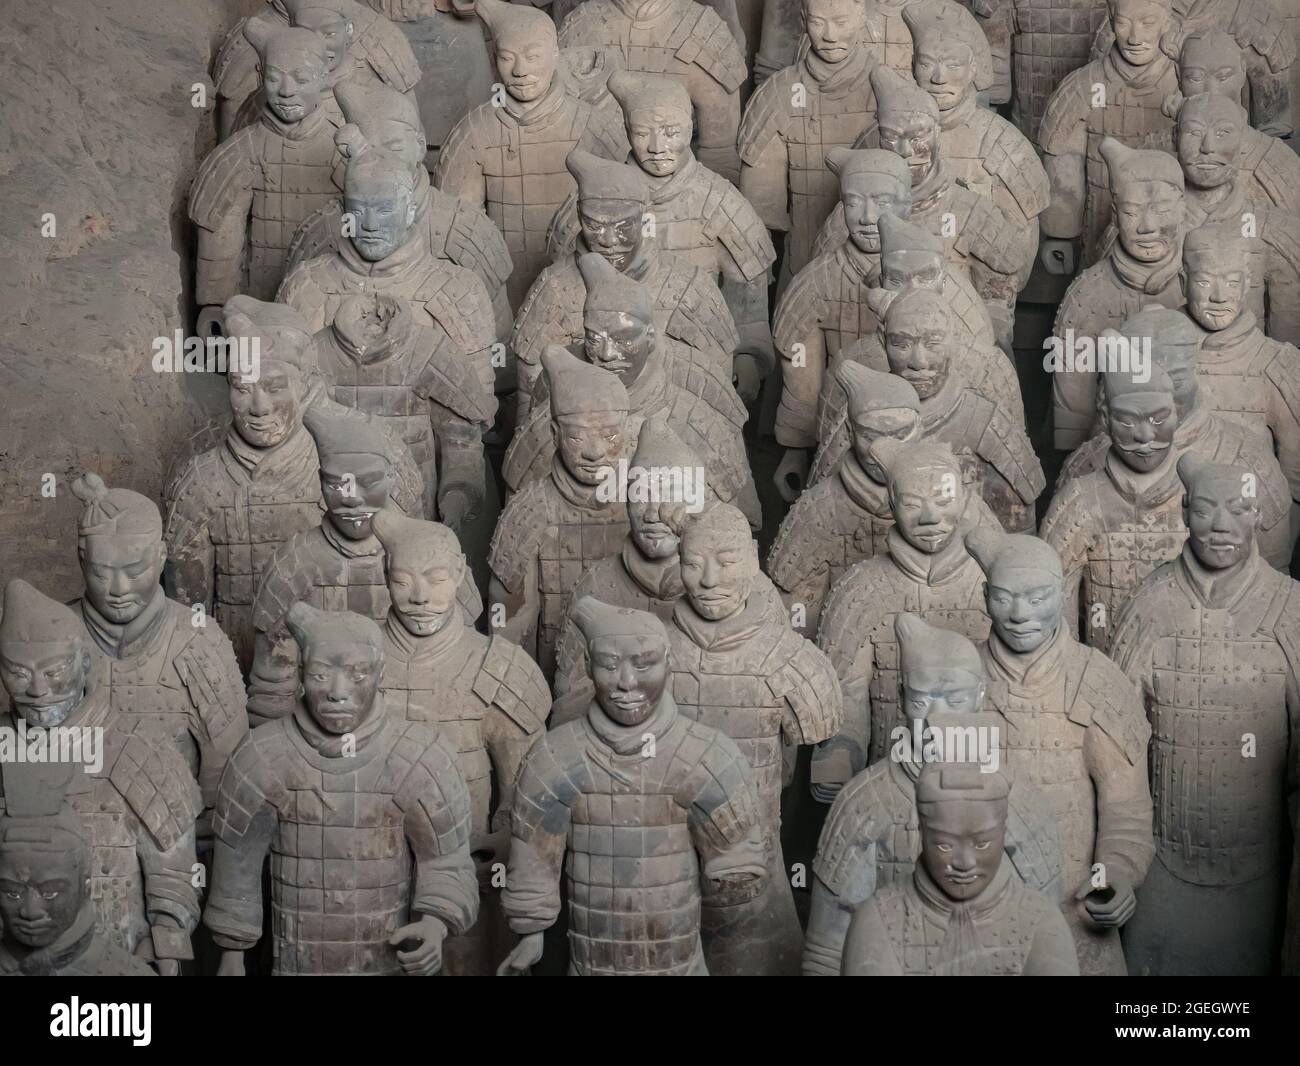 Terracotta soldiers in the tomb of the first emporer of the Qin dynasty of the terracotta warriors at Lintong County, Shaanxi, Xi'an, China, Asia Stock Photo